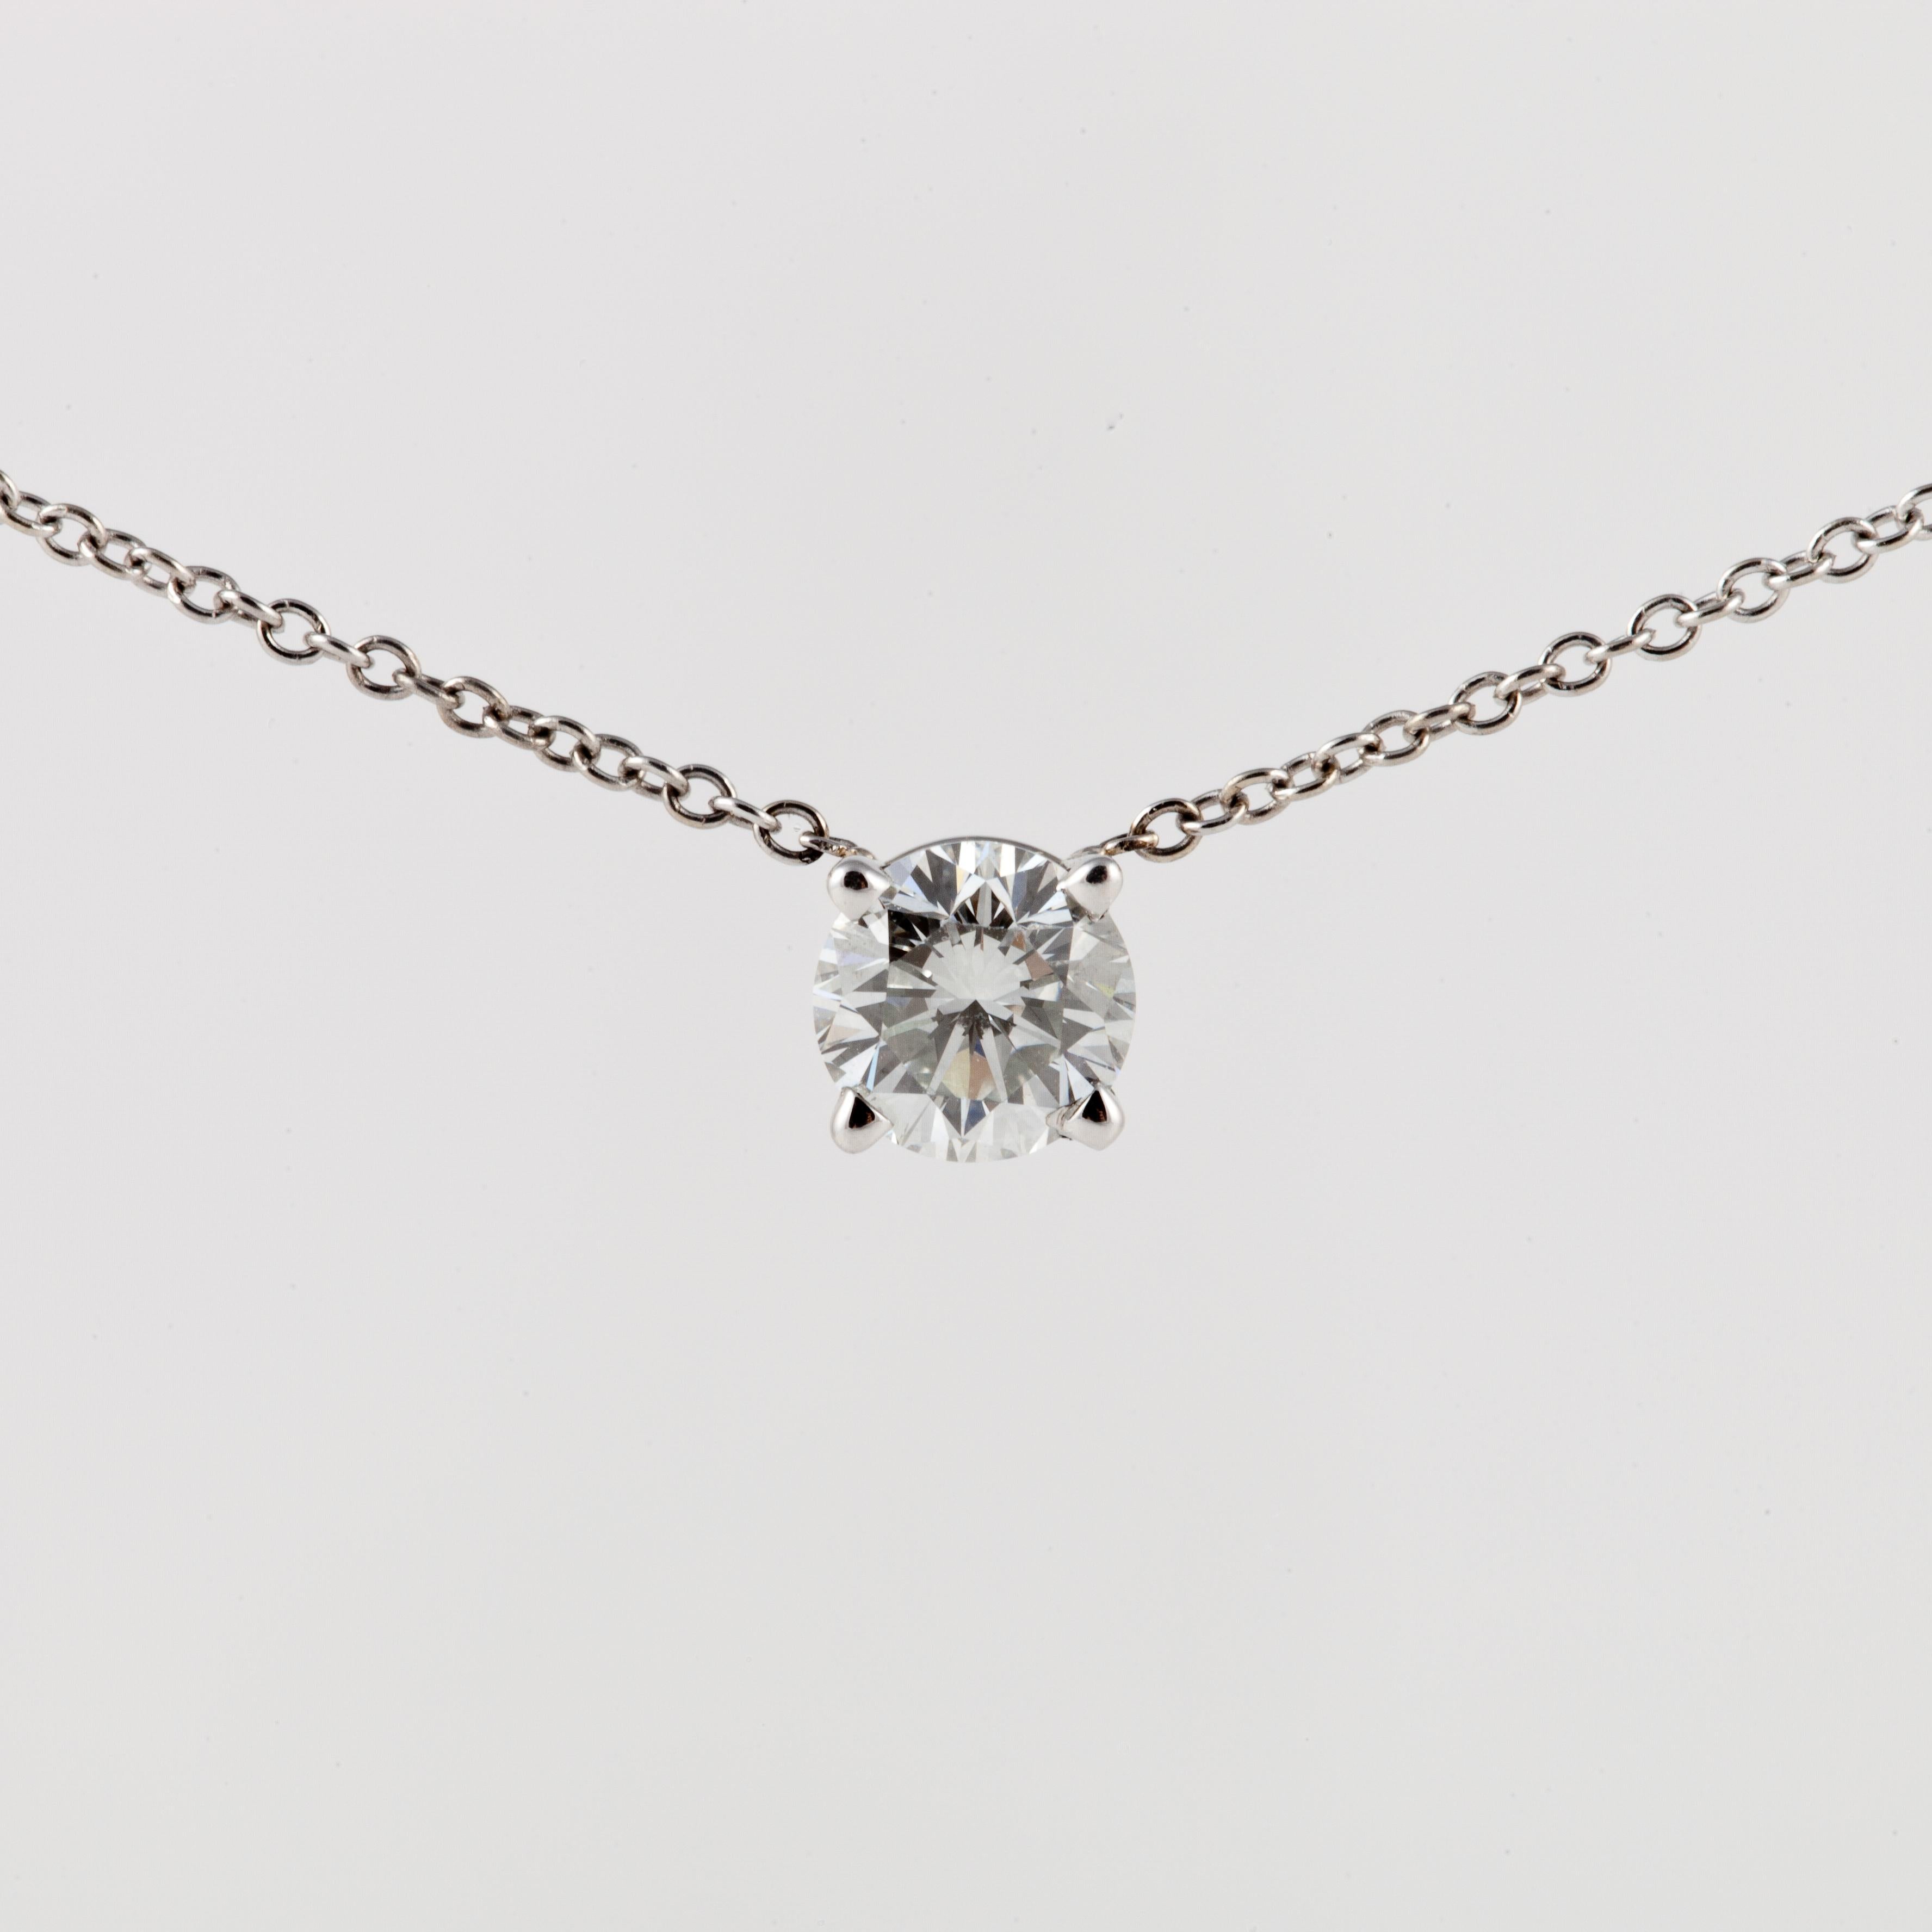 Classic diamond solitaire necklace set in 18K white gold.  The diamond is 0.70 carats; G in color and VS1 in clarity.  Chain measures 17-1/2